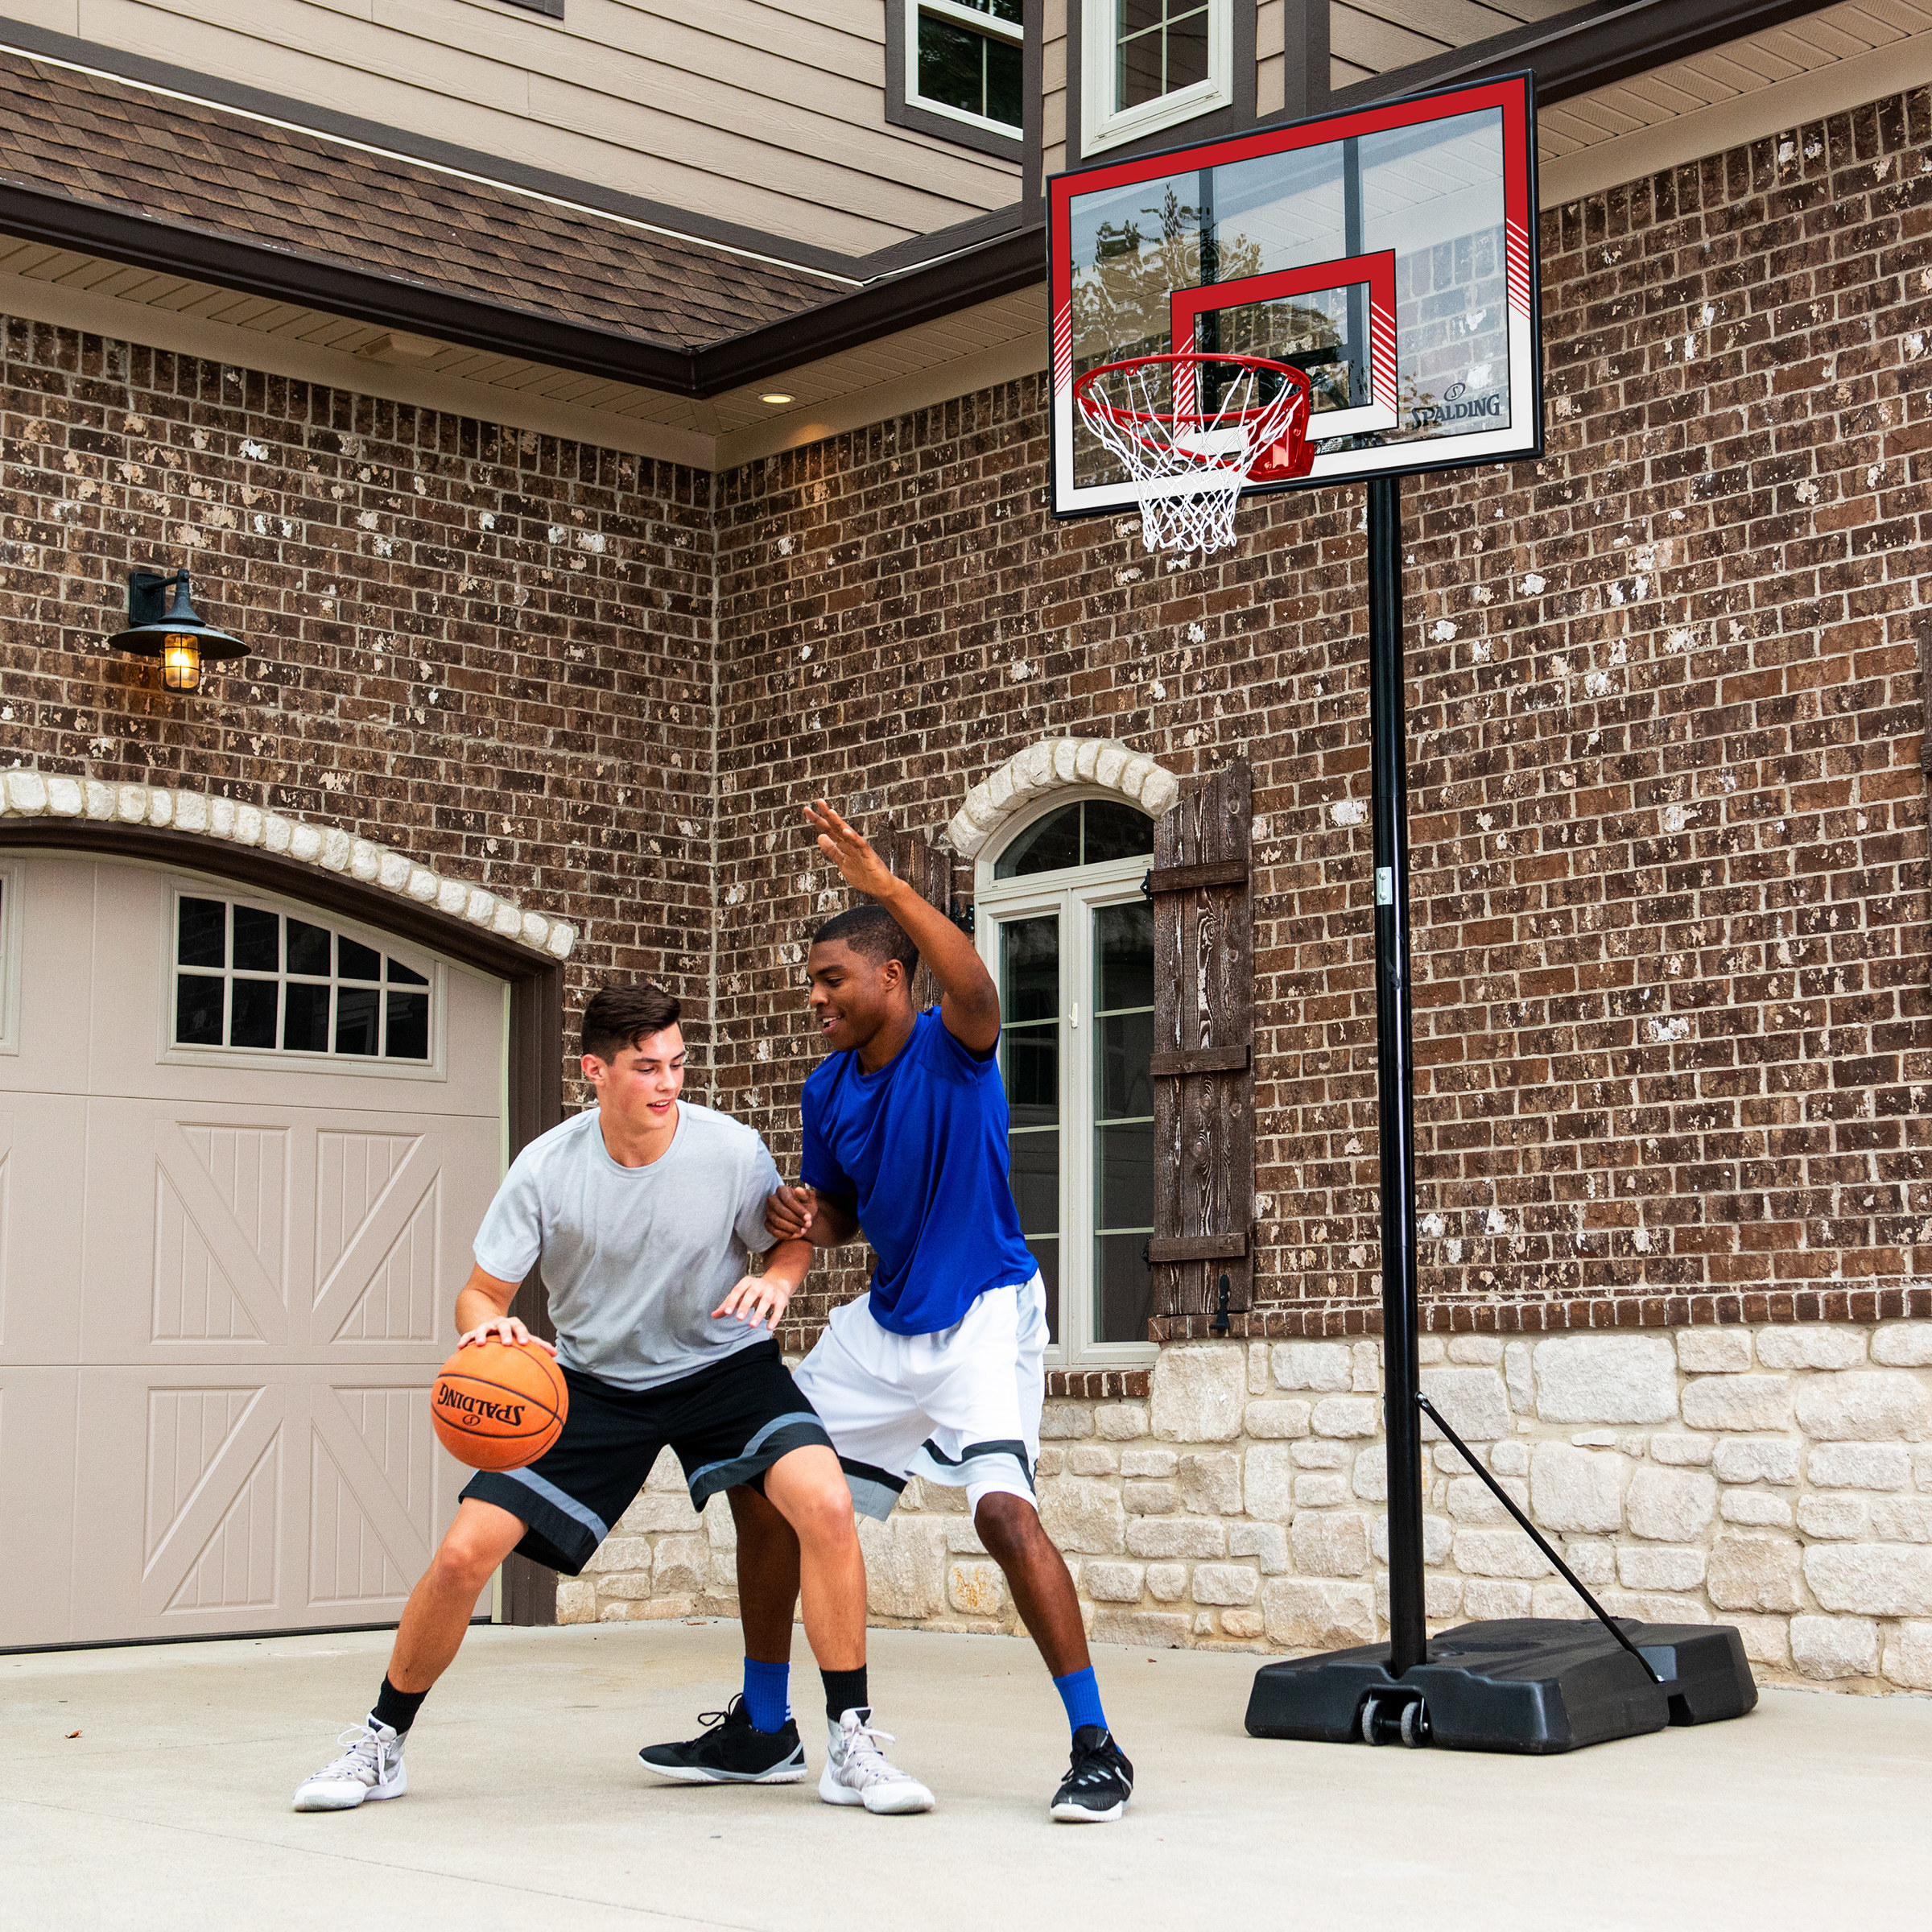 Two people playing with the hoop in a driveway